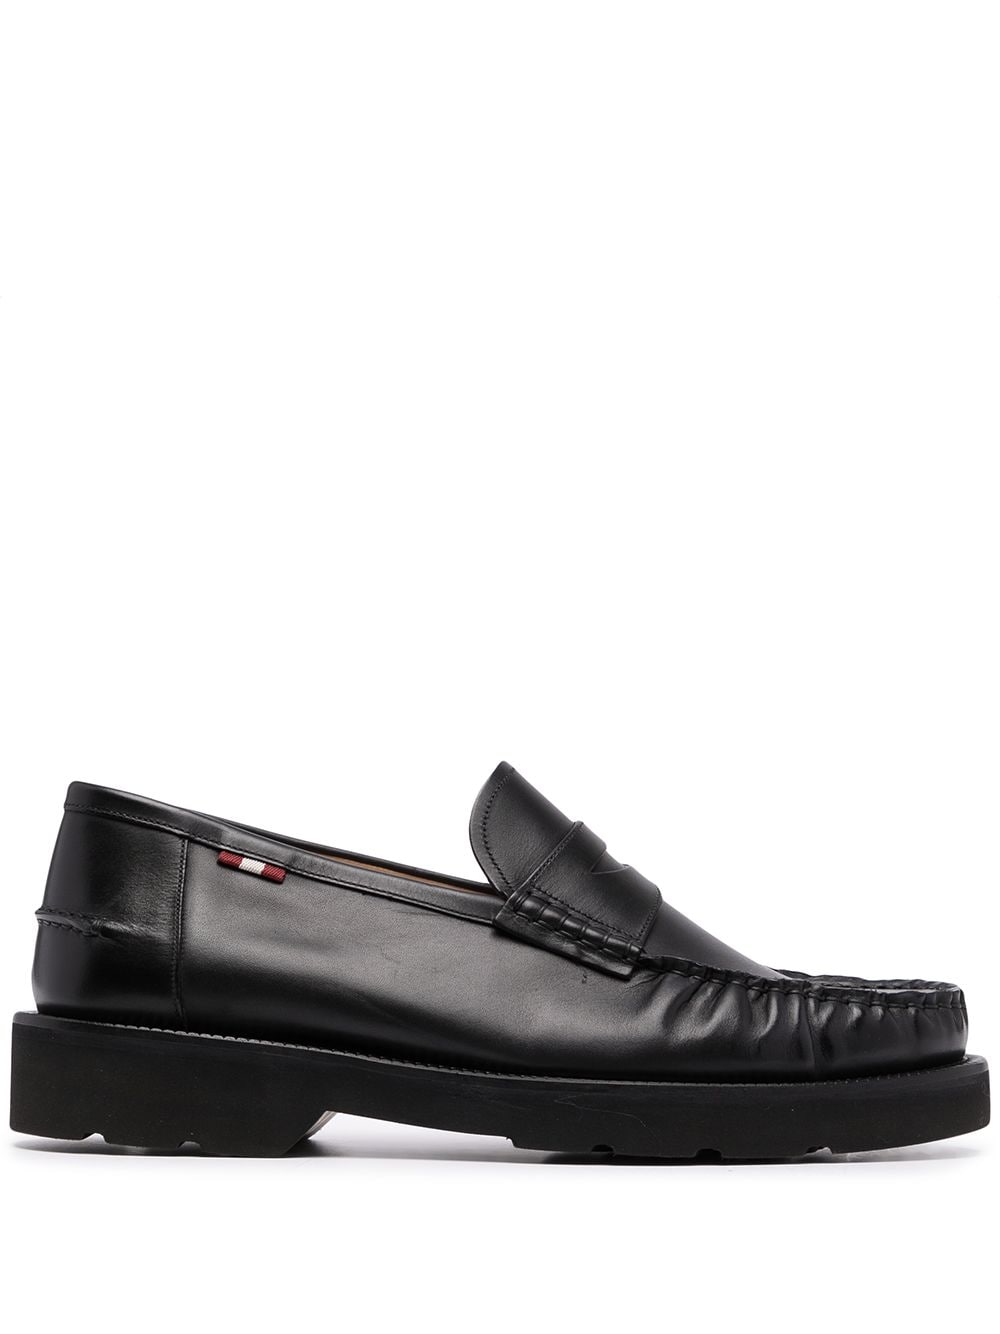 Image 1 of Bally Noah leather loafers